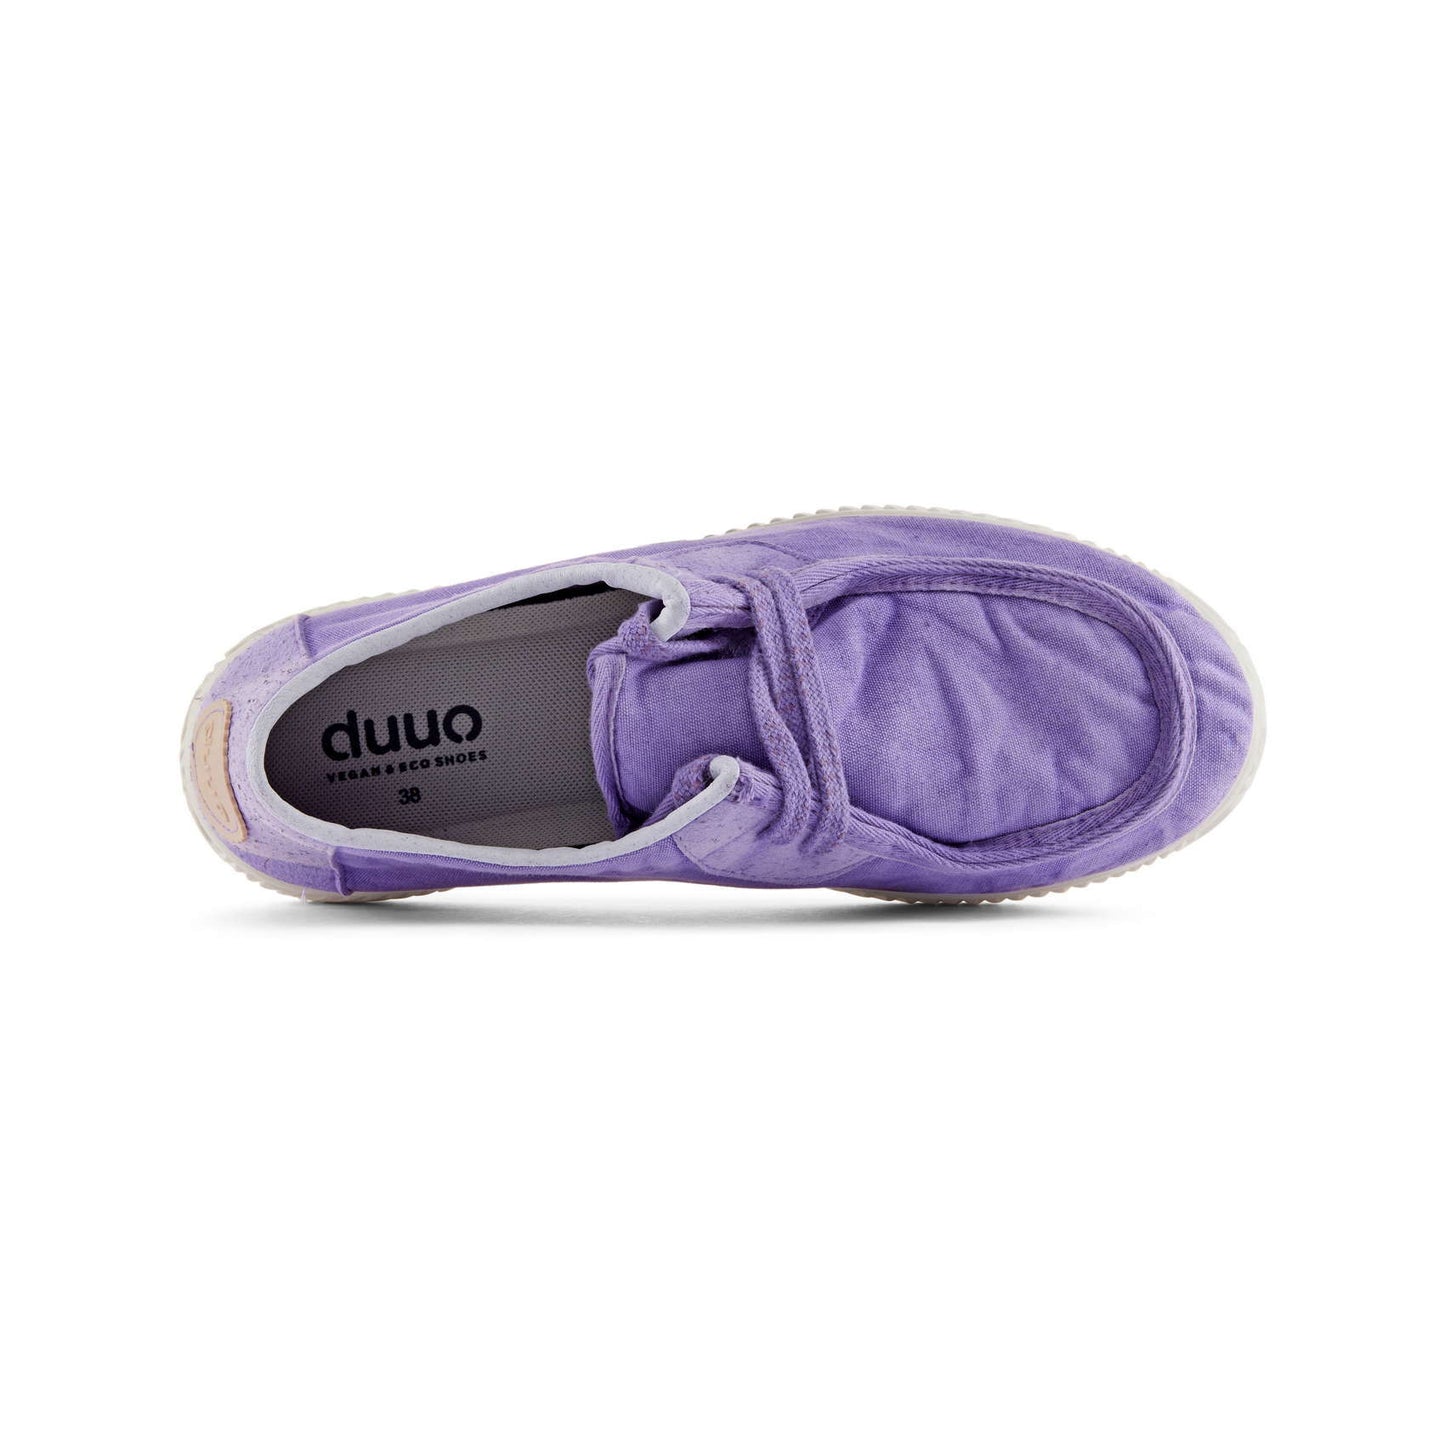 DUUO | WOMEN'S SNEAKERS | ONA WALABY WASHED 050 VIOLET 78) | LILAC